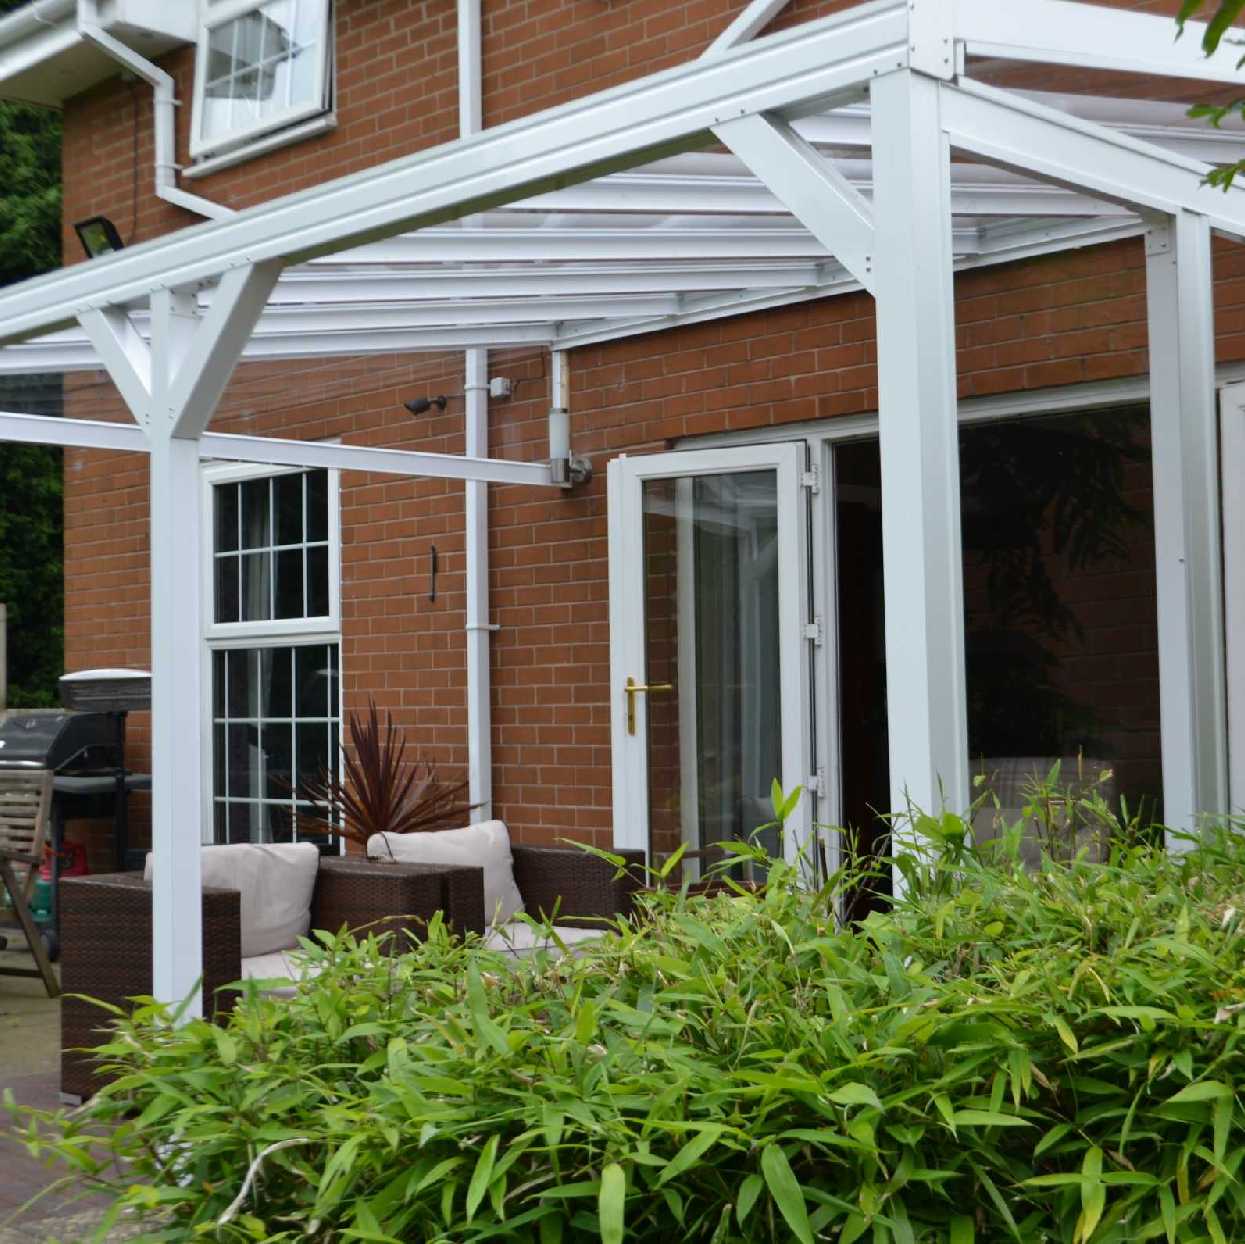 Omega Smart Lean-To Canopy, White UNGLAZED for 6mm Glazing - 4.9m (W) x 2.5m (P), (3) Supporting Posts from Omega Build